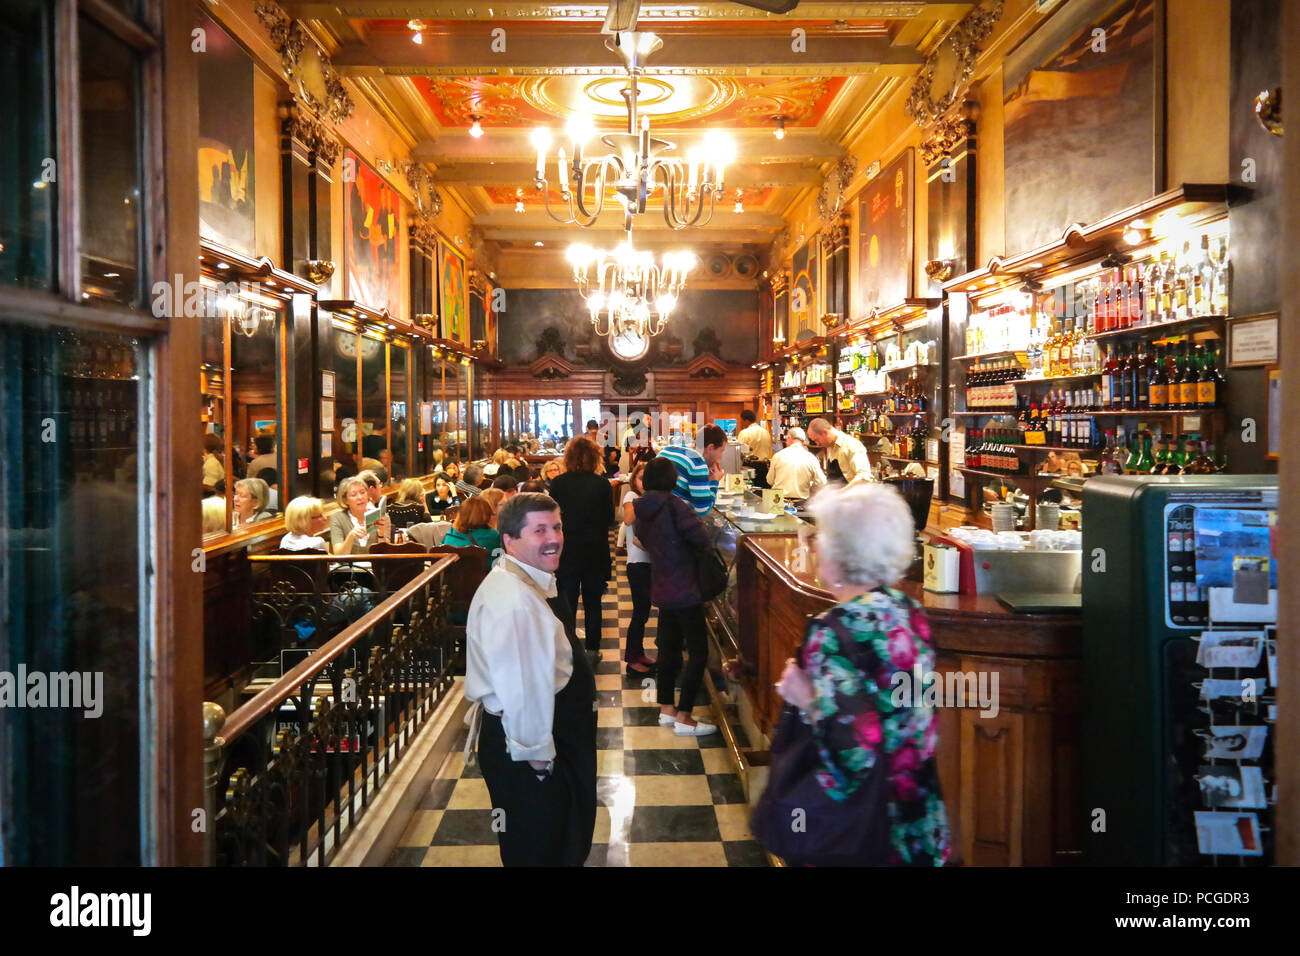 Famous cafe and restaurant A Brasileira in the Chiado district of Lisbon, Portugal Stock Photo